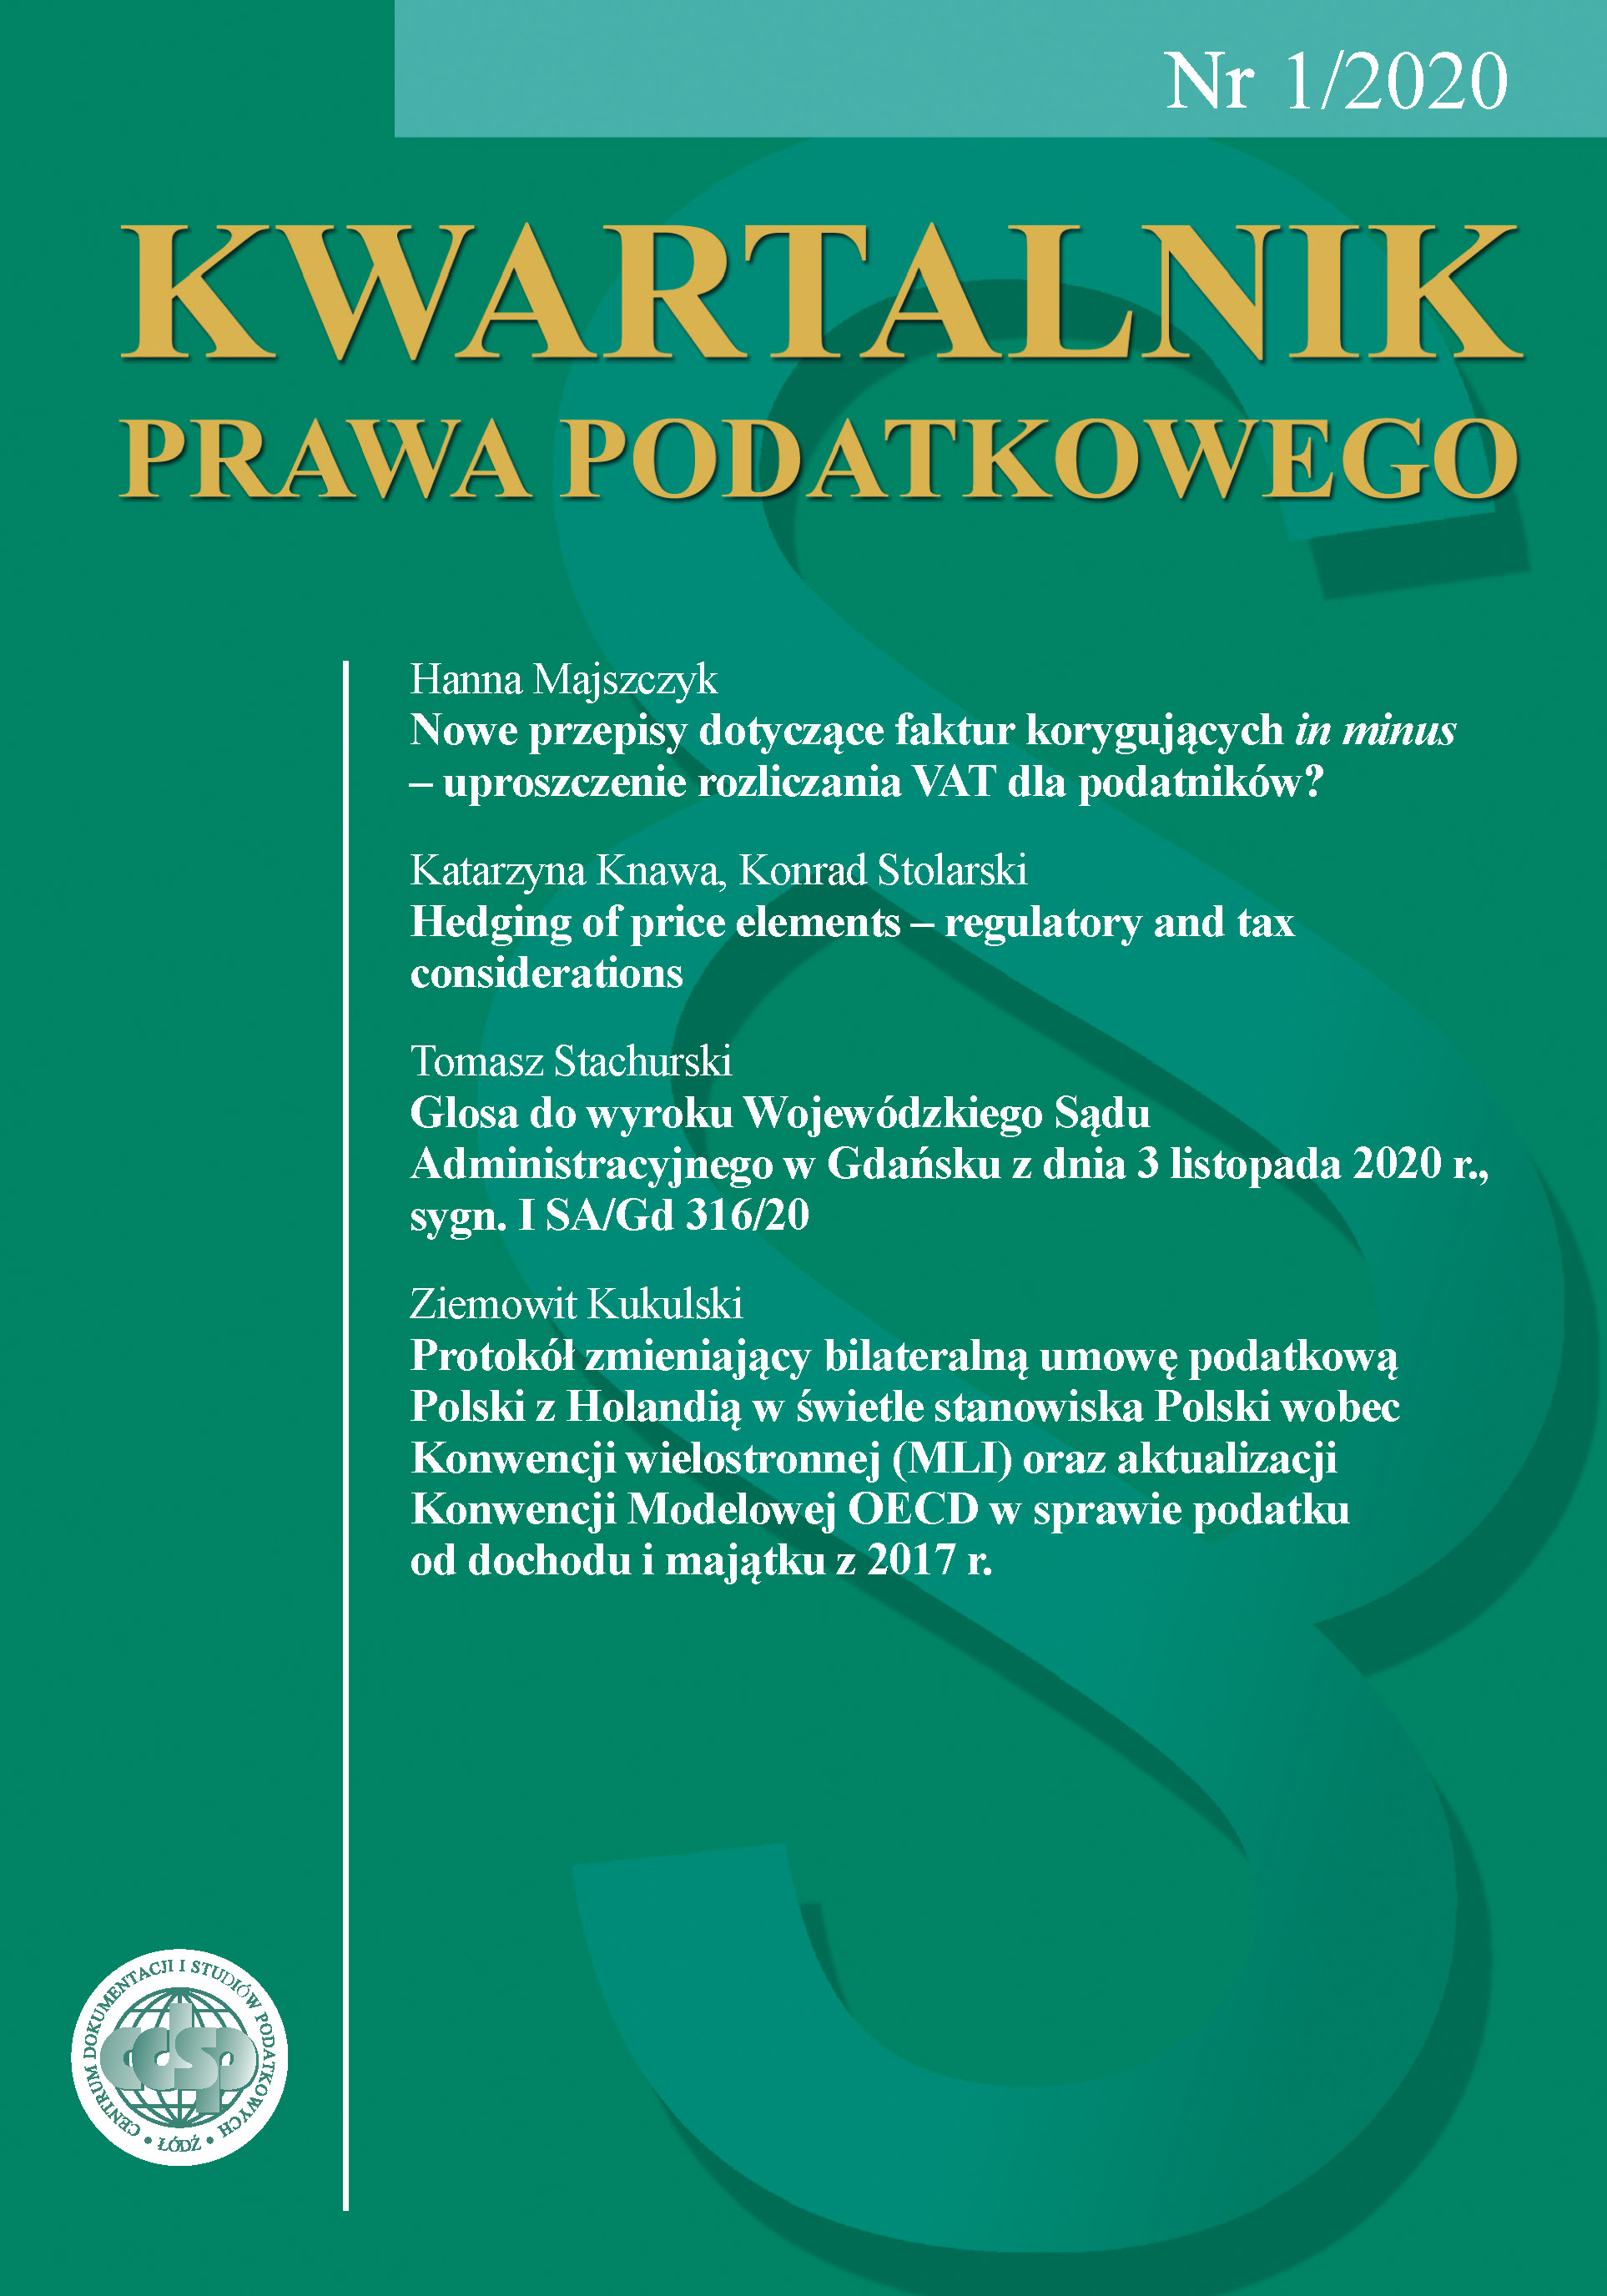 Amending protocol to the bilateral tax treaty between Poland and the Netherlands in the light of Poland’s position to the Multilateral Convention and the 2017 update of the OECD Model Convention on income and capital Cover Image